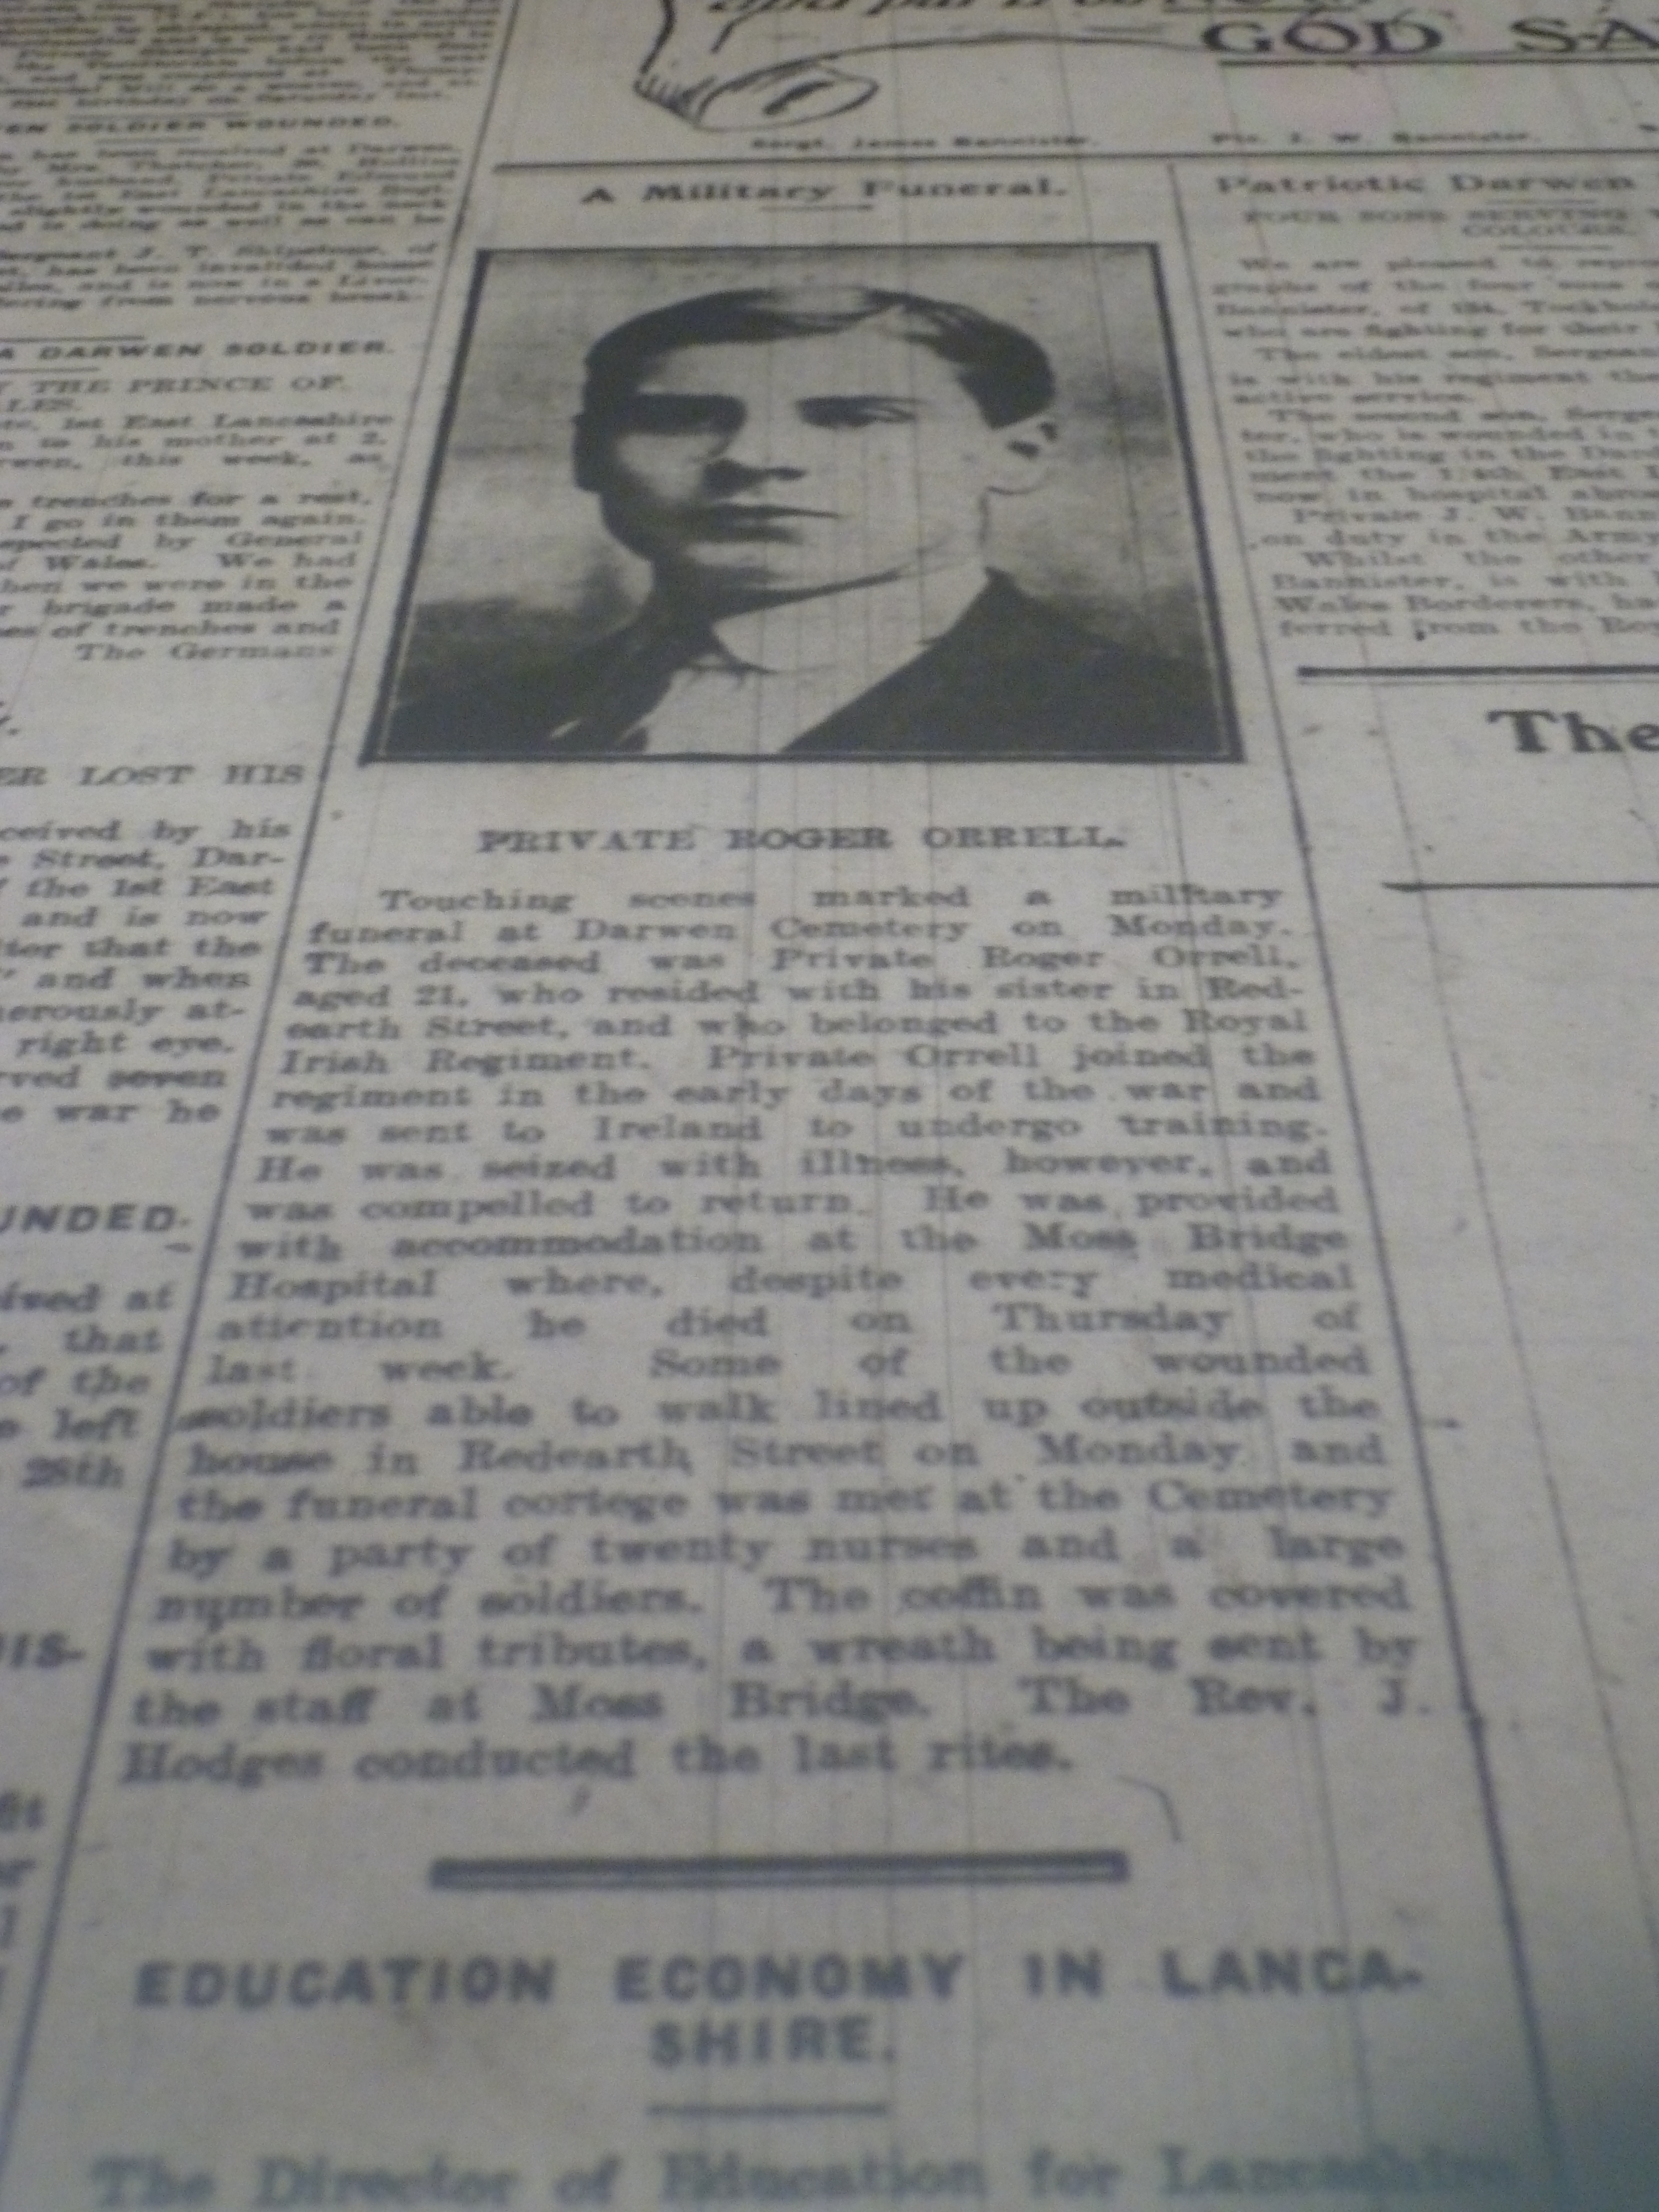 Darwen Advertiser newspaper showung the obituary of the soldier Roger Orrell of the 5th Irish Regiment 1915